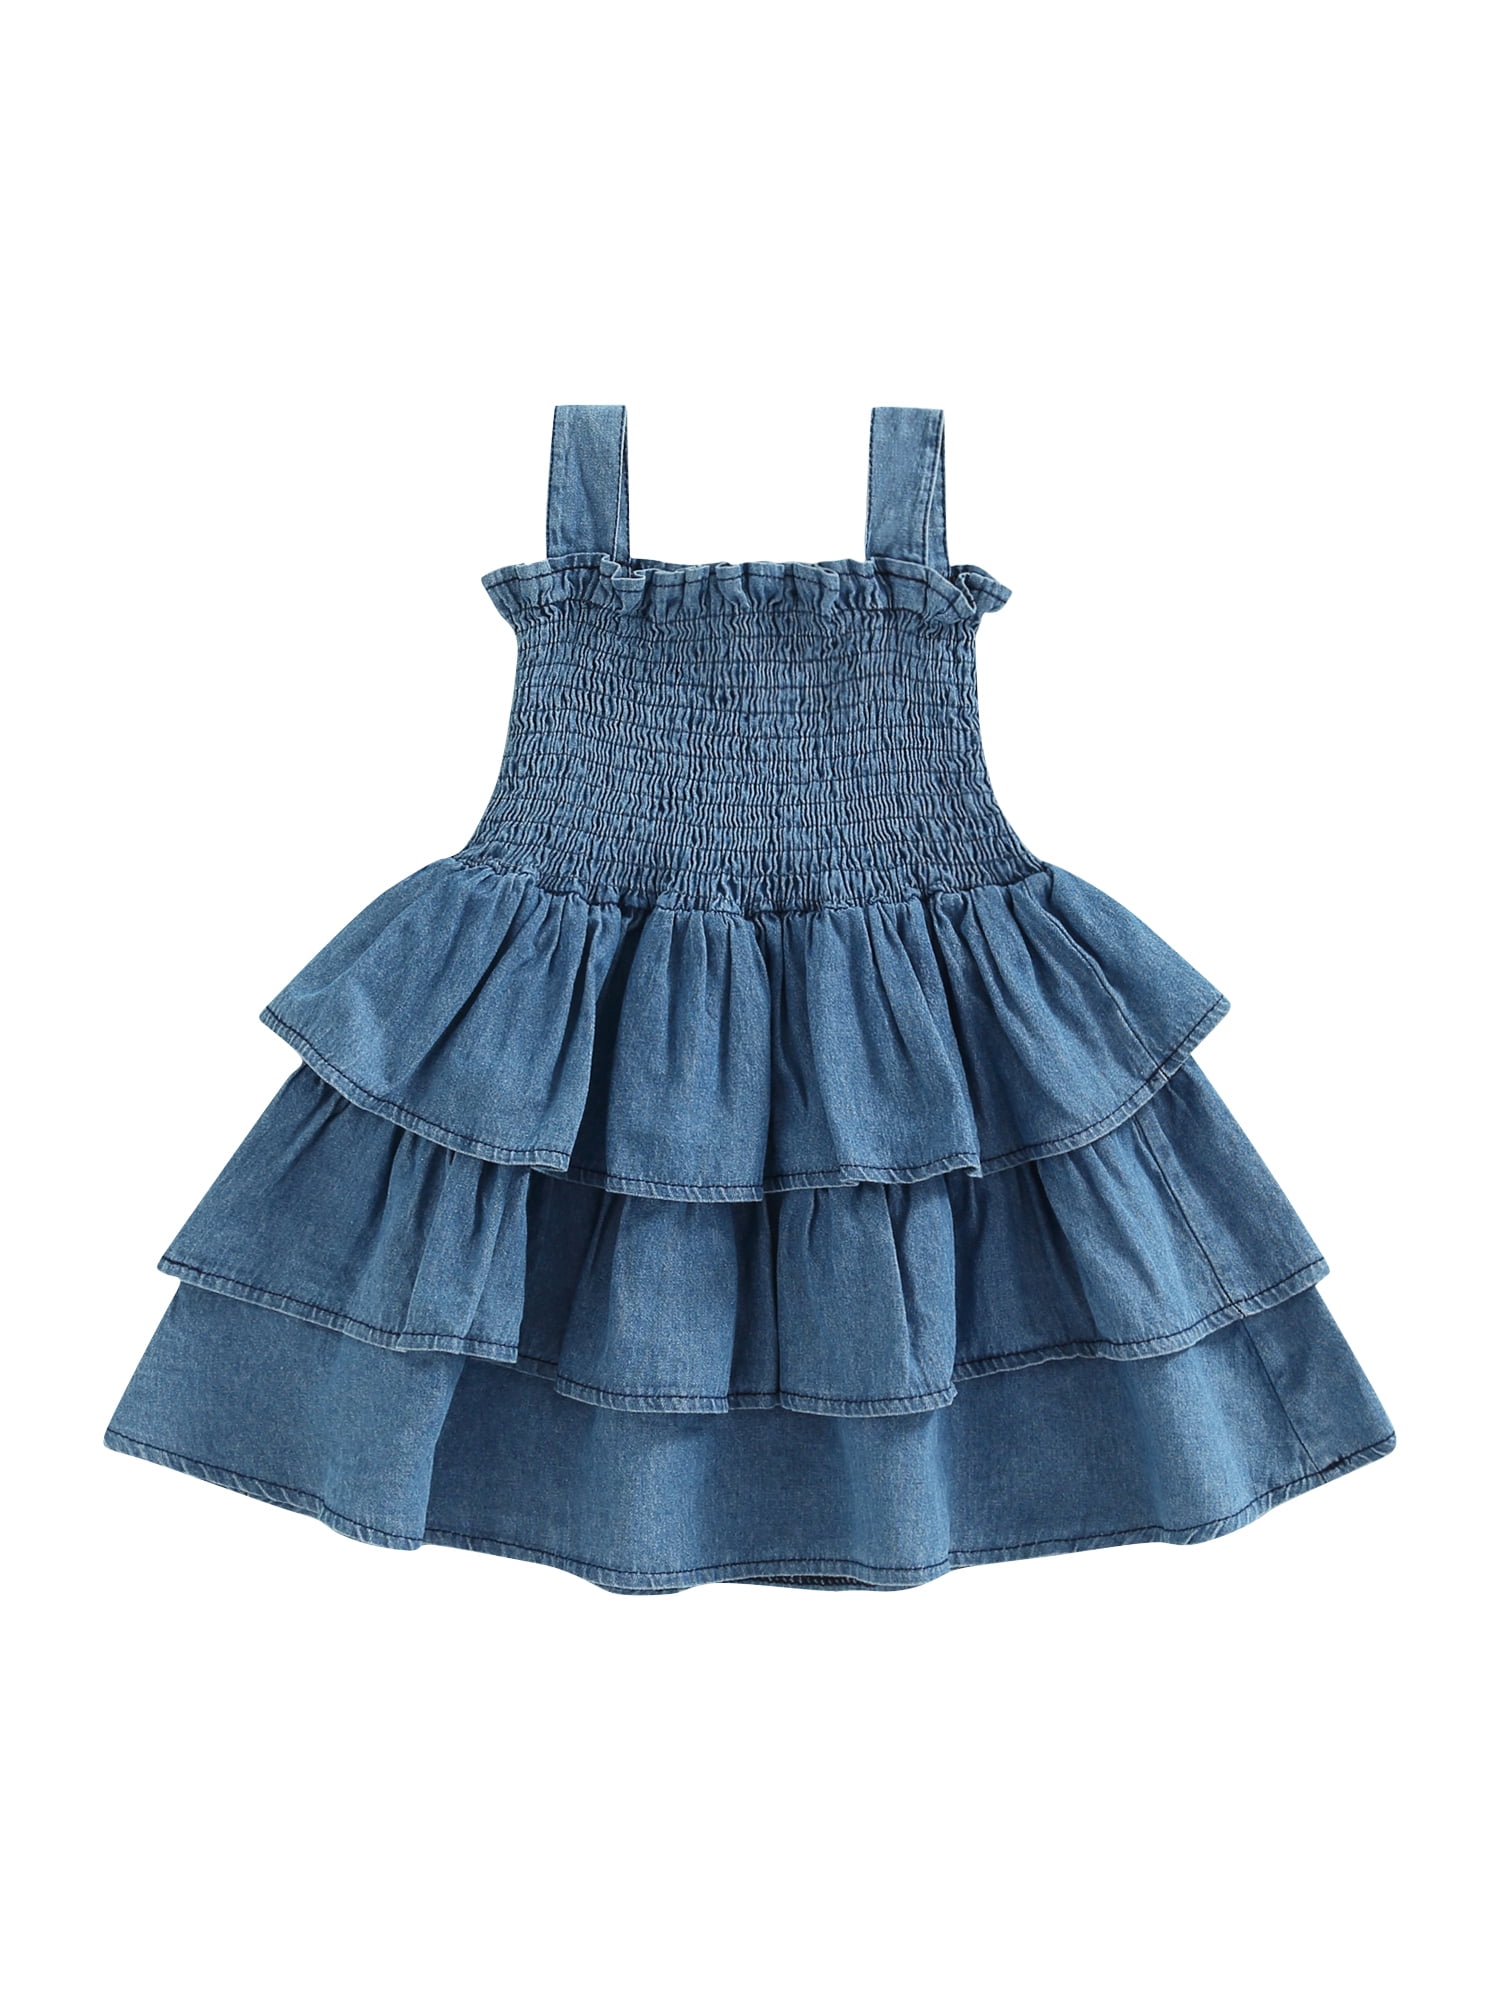 Princess Look Fit & Flare Denim Sleeveless Dress for Kids Girl (5-6 Years)  : Amazon.in: Clothing & Accessories